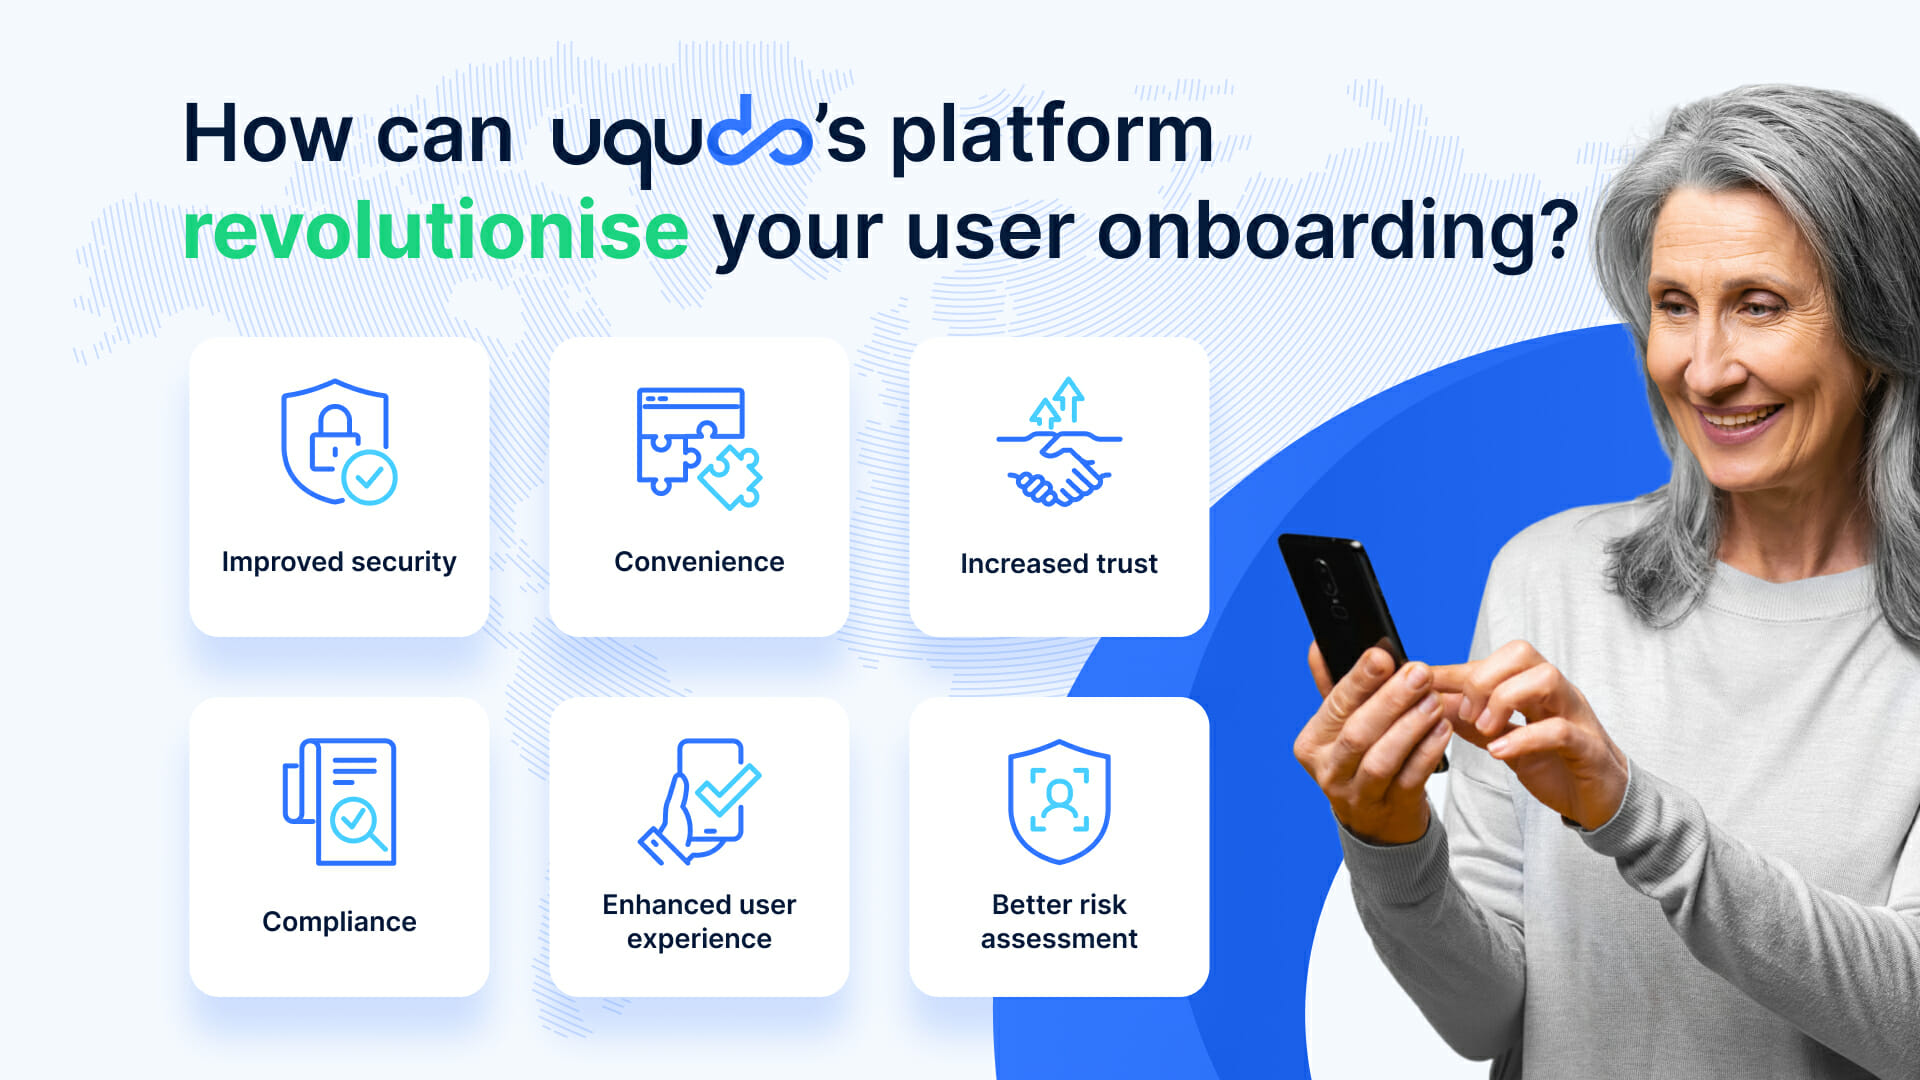 How can uqudo’s platform revolutionise your user onboarding?